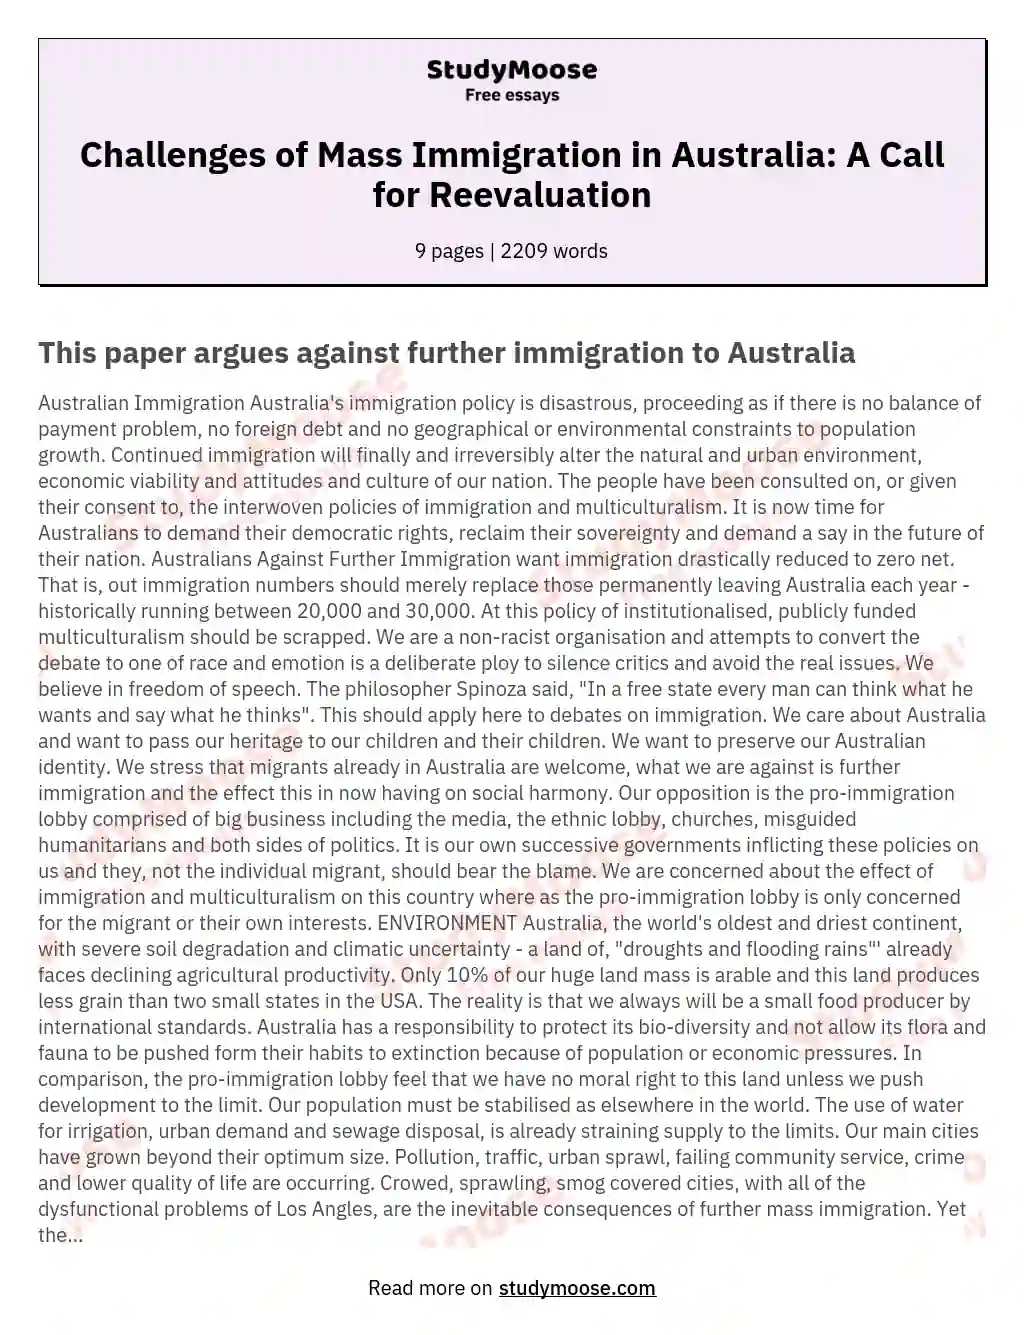 Challenges of Mass Immigration in Australia: A Call for Reevaluation essay